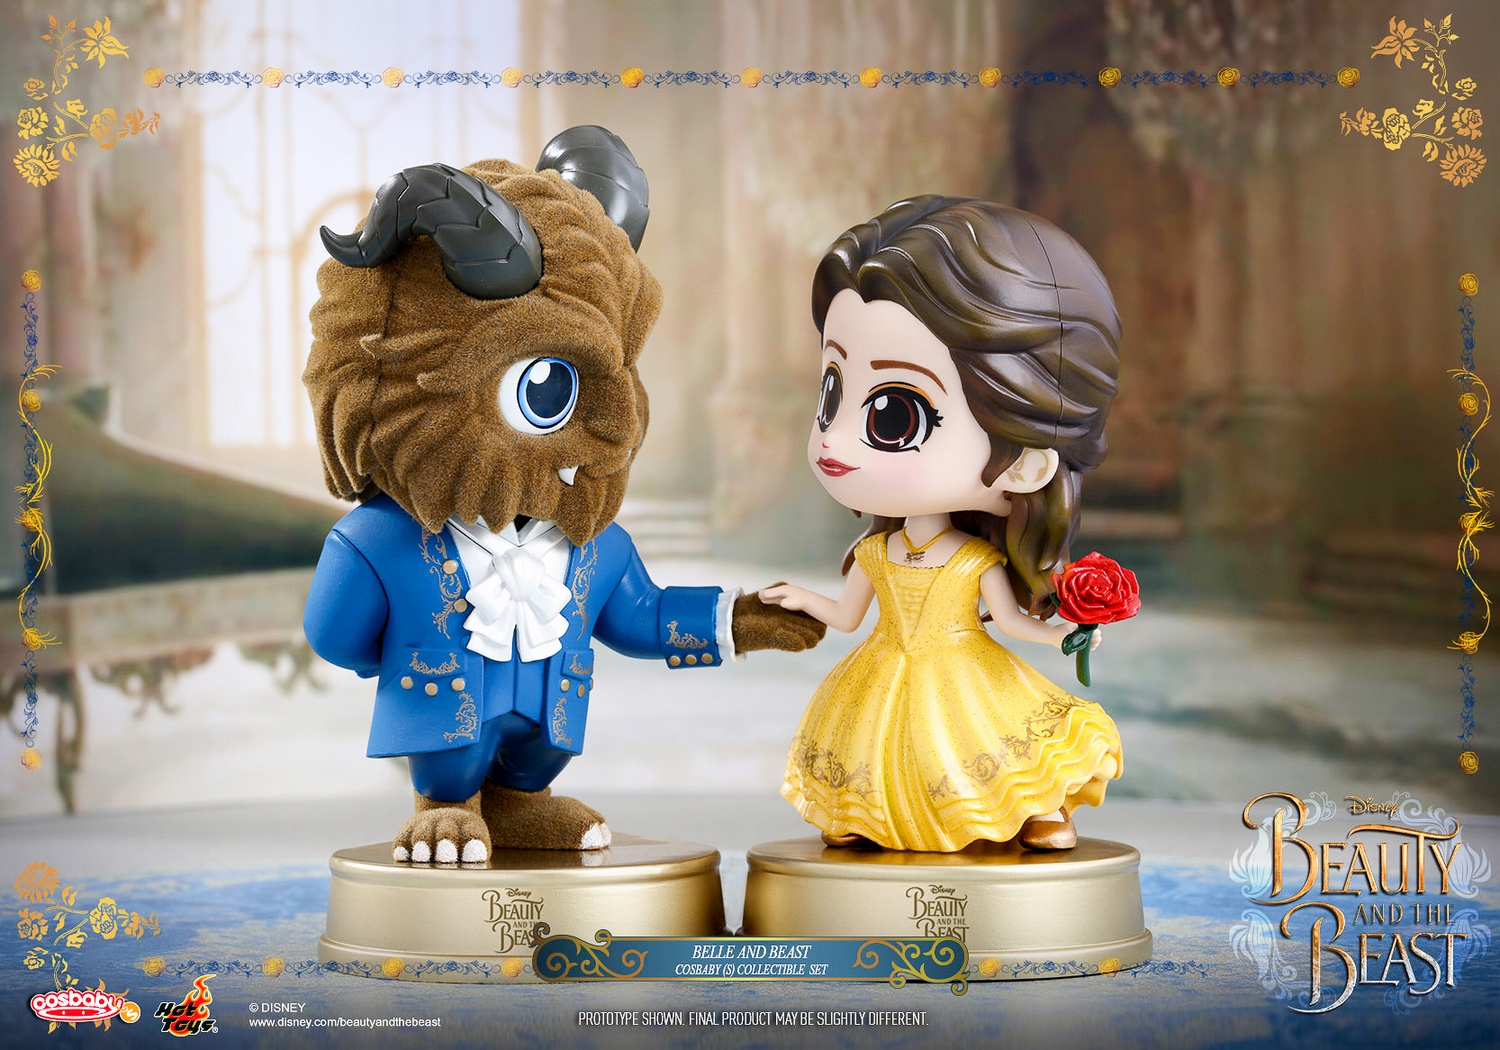 Hot-Toys-COSB352-353-Beauty-and-the-Beast-Cosbaby-002.jpg